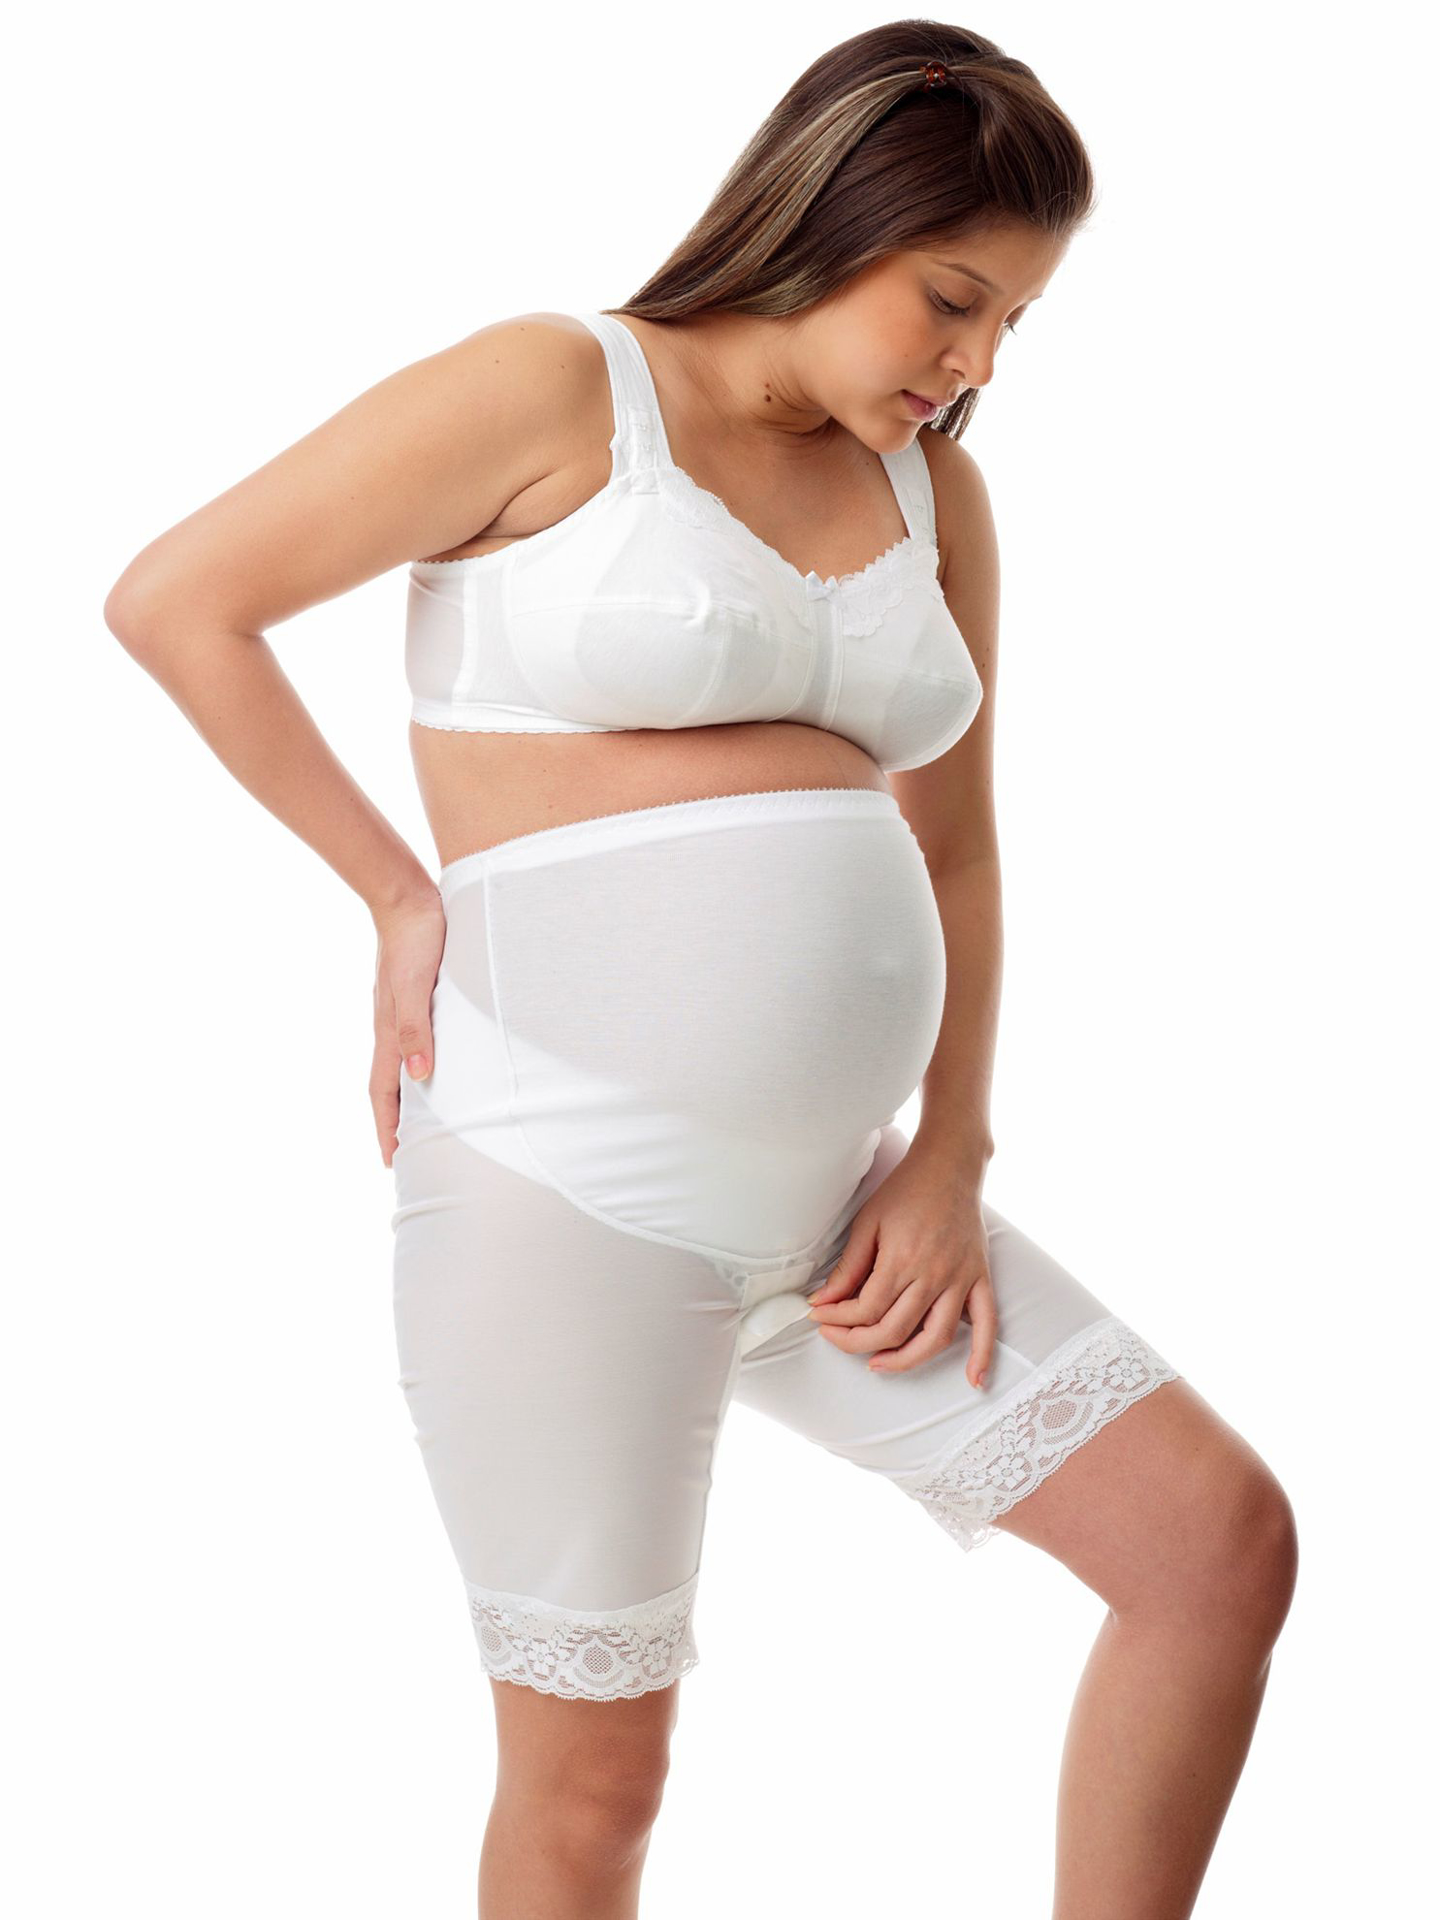 https://www.underworks.com/images/thumbs/0000058_maternity-back-and-tummy-support-girdle-with-varicosity-belt.jpeg